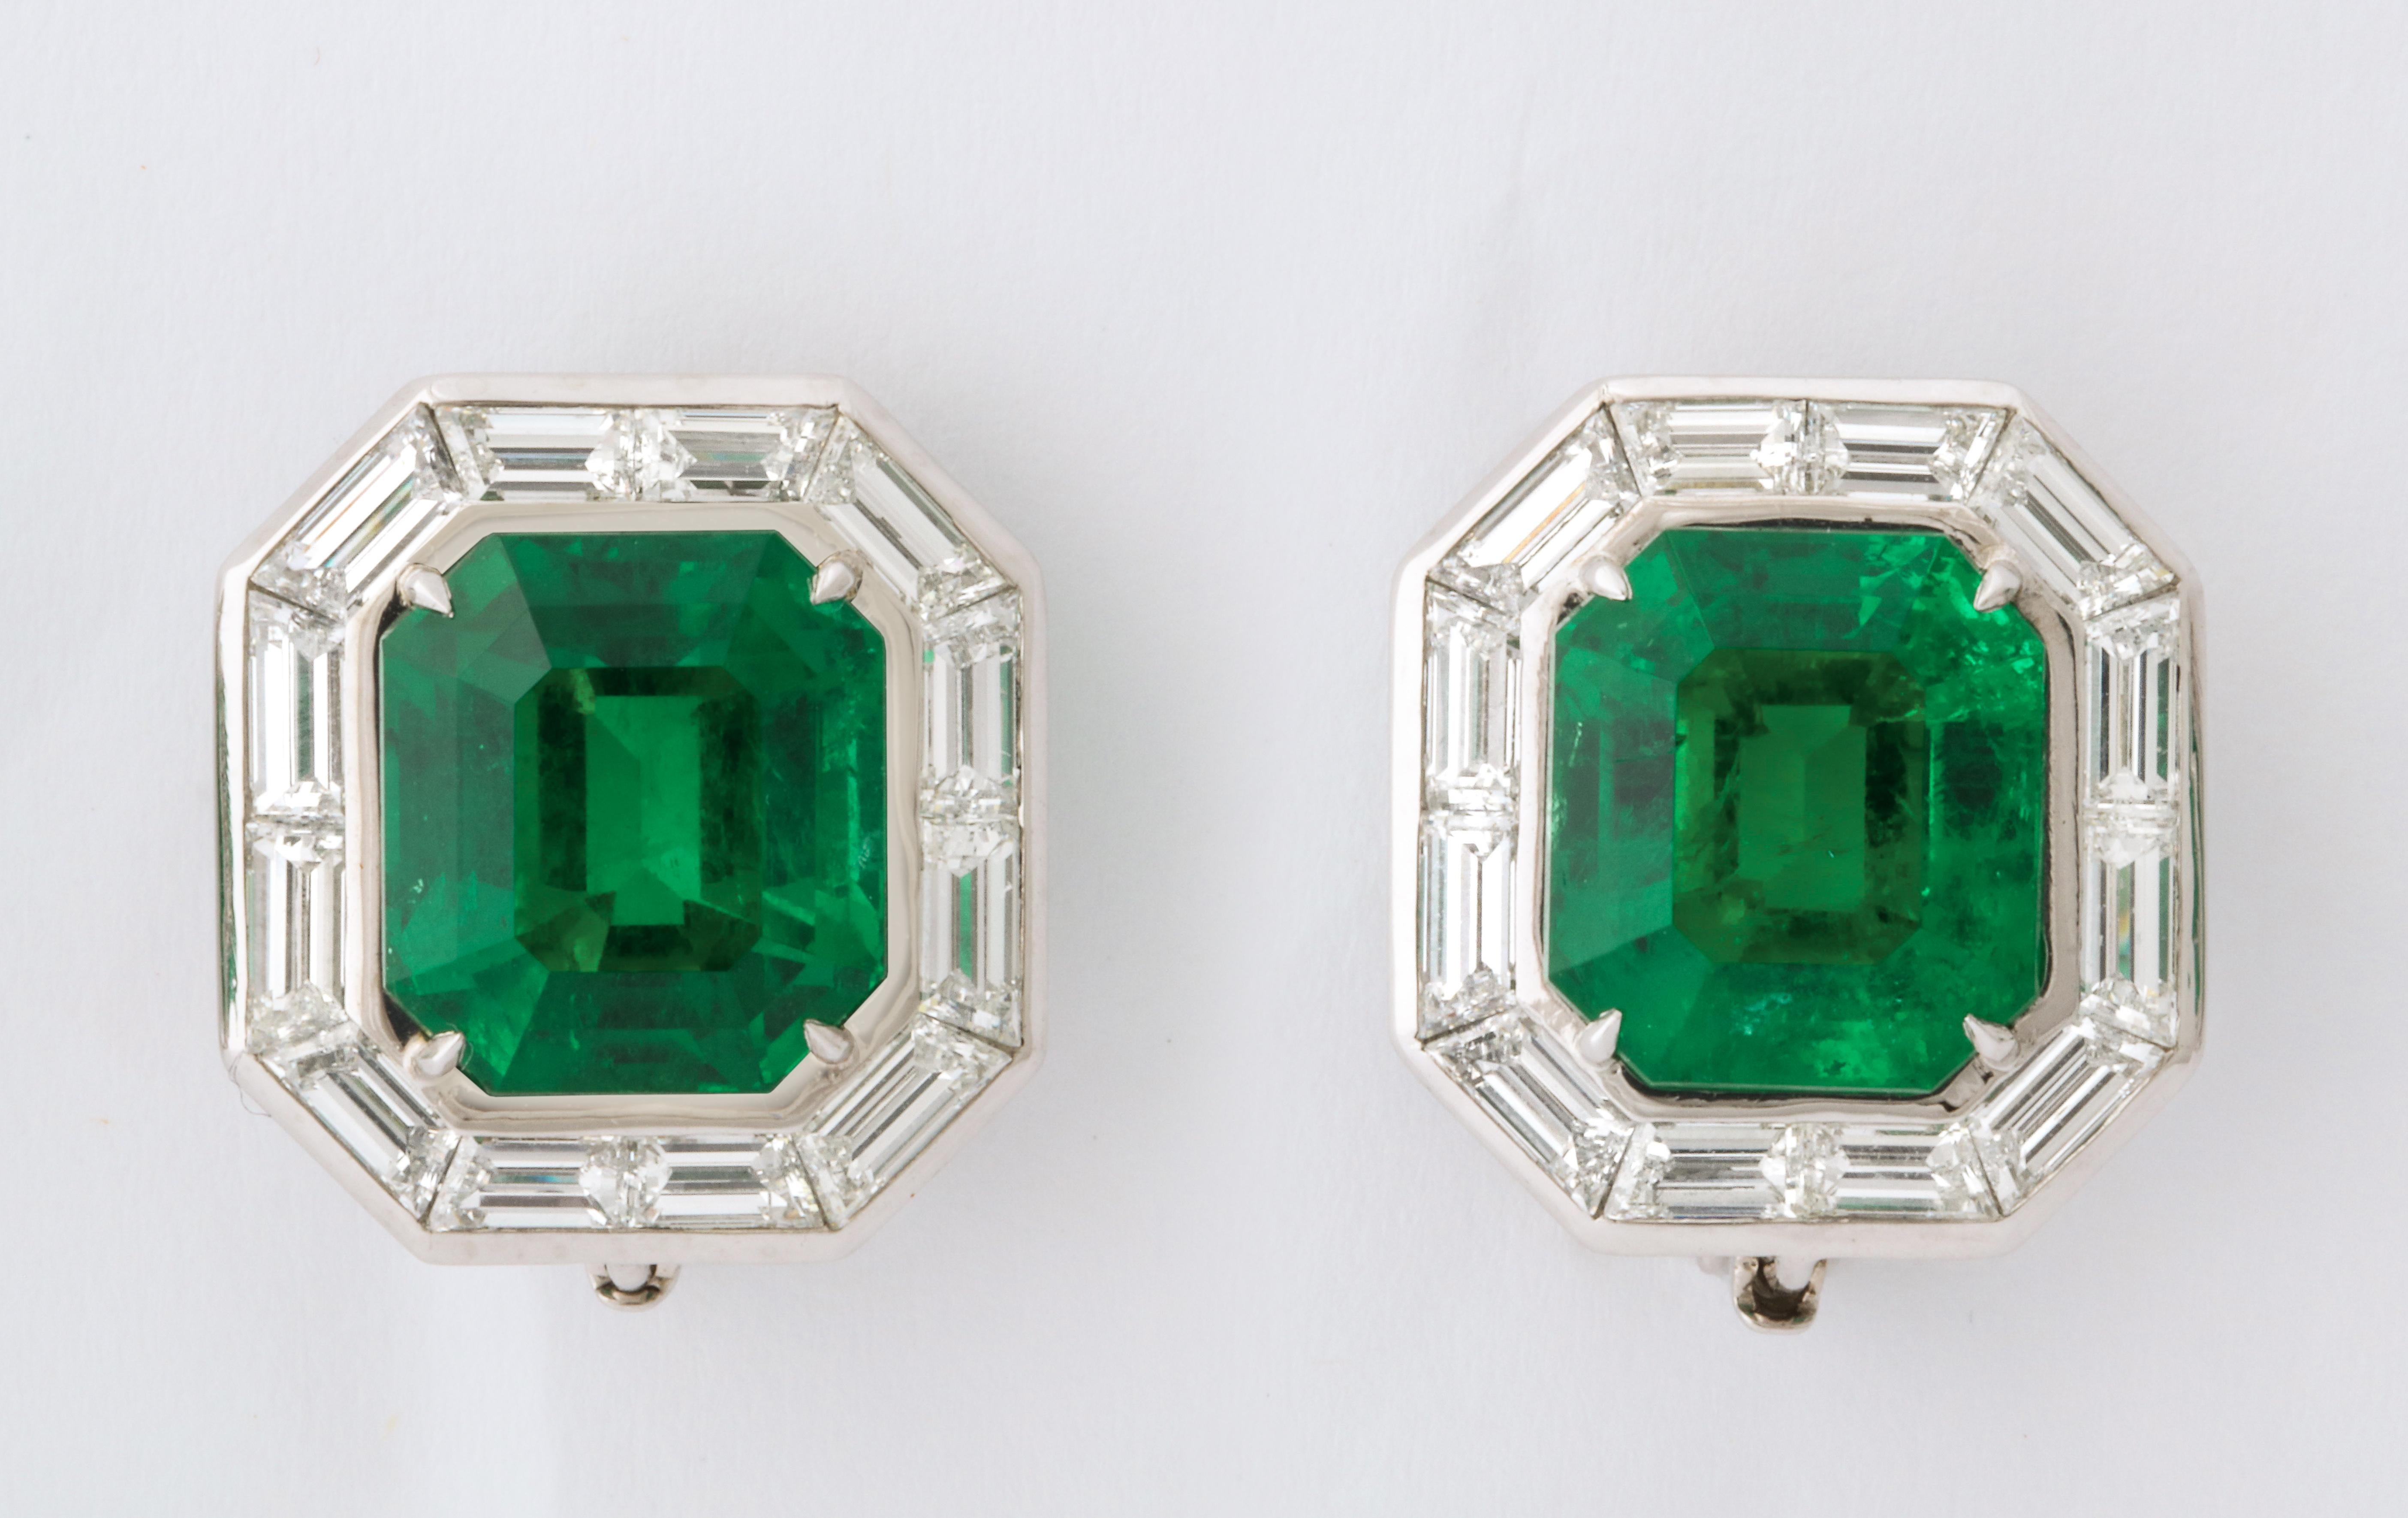 The very fine gem quality Colombian emeralds weighing 5.53cts and 5.58cts are surrounded by custom cut baguette diamonds (24=3.86cts).  The exquisite platinum mounting was completely handmade in one of New York's finest ateliers.  The emeralds are